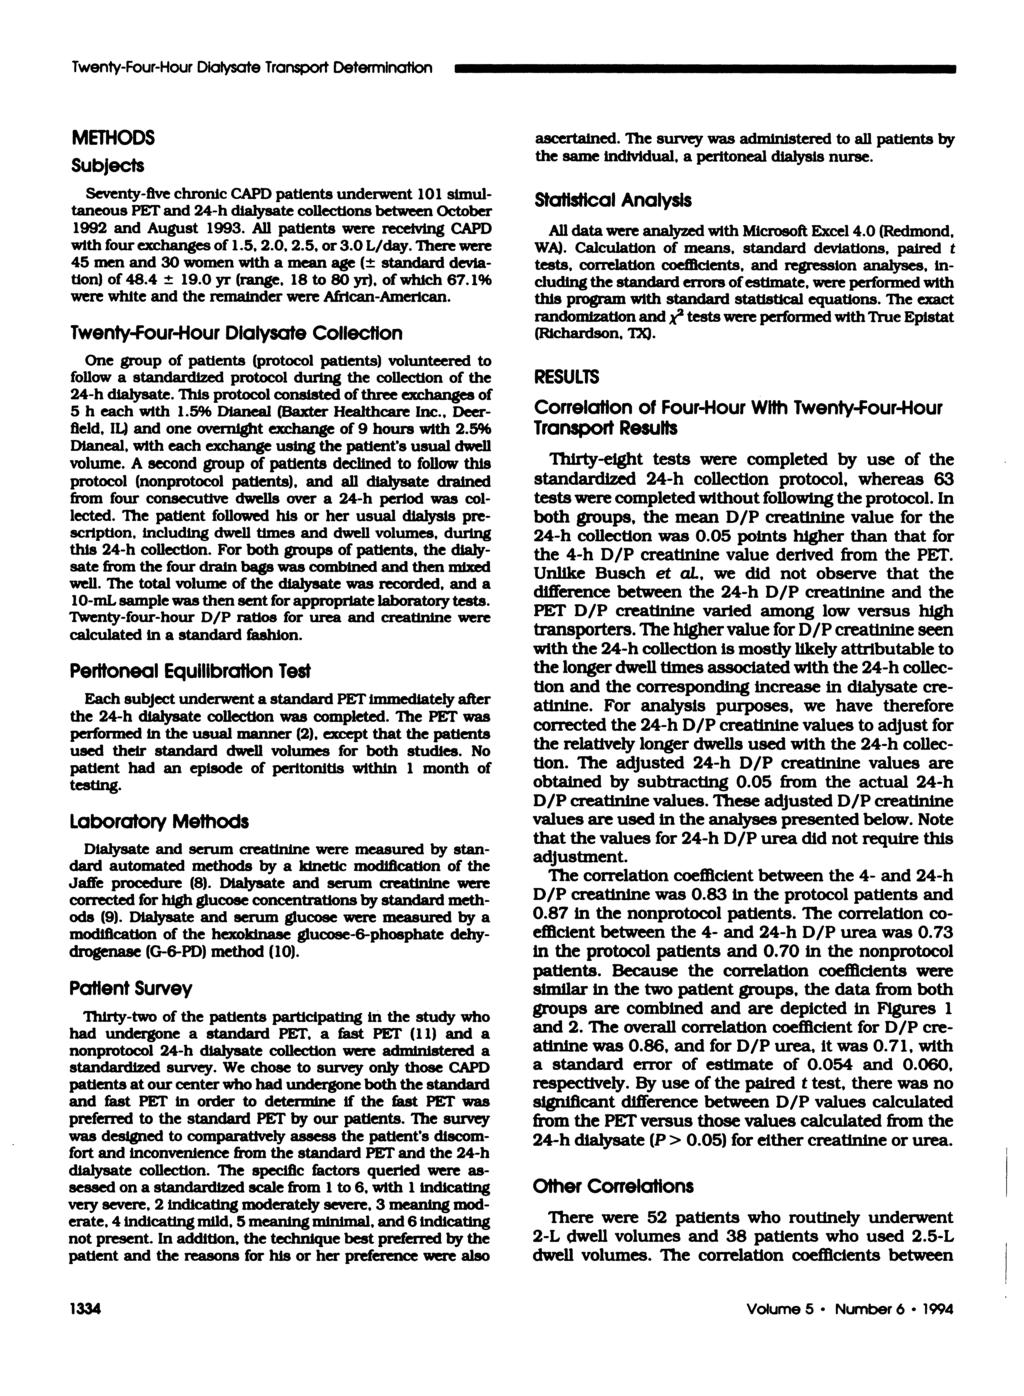 Twenty-Four-Hour Dialysate Transport Determination METHODS Subjects Seventy-five chronic CAPD patients underwent 101 simultaneous PET and 24-h dialysate collections between October 1992 and August